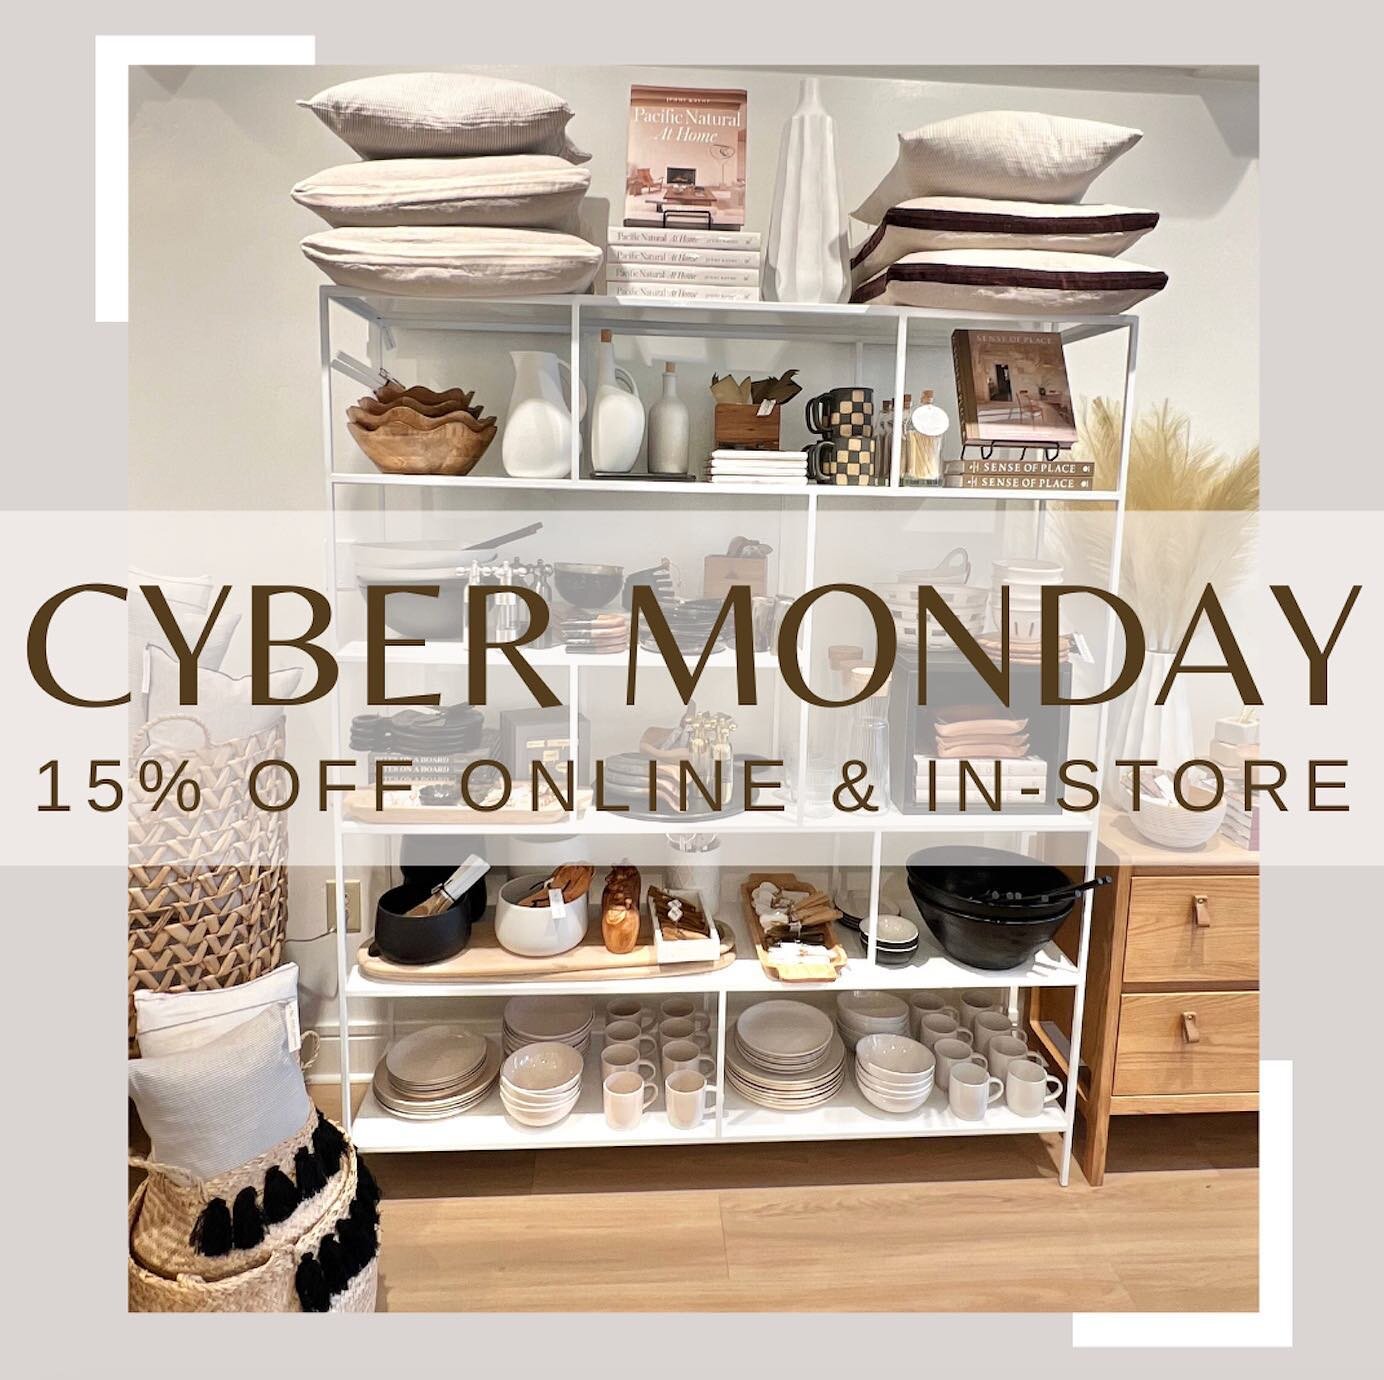 15% off sitewide continues today for Cyber Monday, online and in-store! Shop link in profile, or stop by today in Carmel and say hello to Susan, 11am-4pm. Complimentary holiday gift bags now in store! #shoplocal #shopsmall #hosthousecarmel #hosthouse